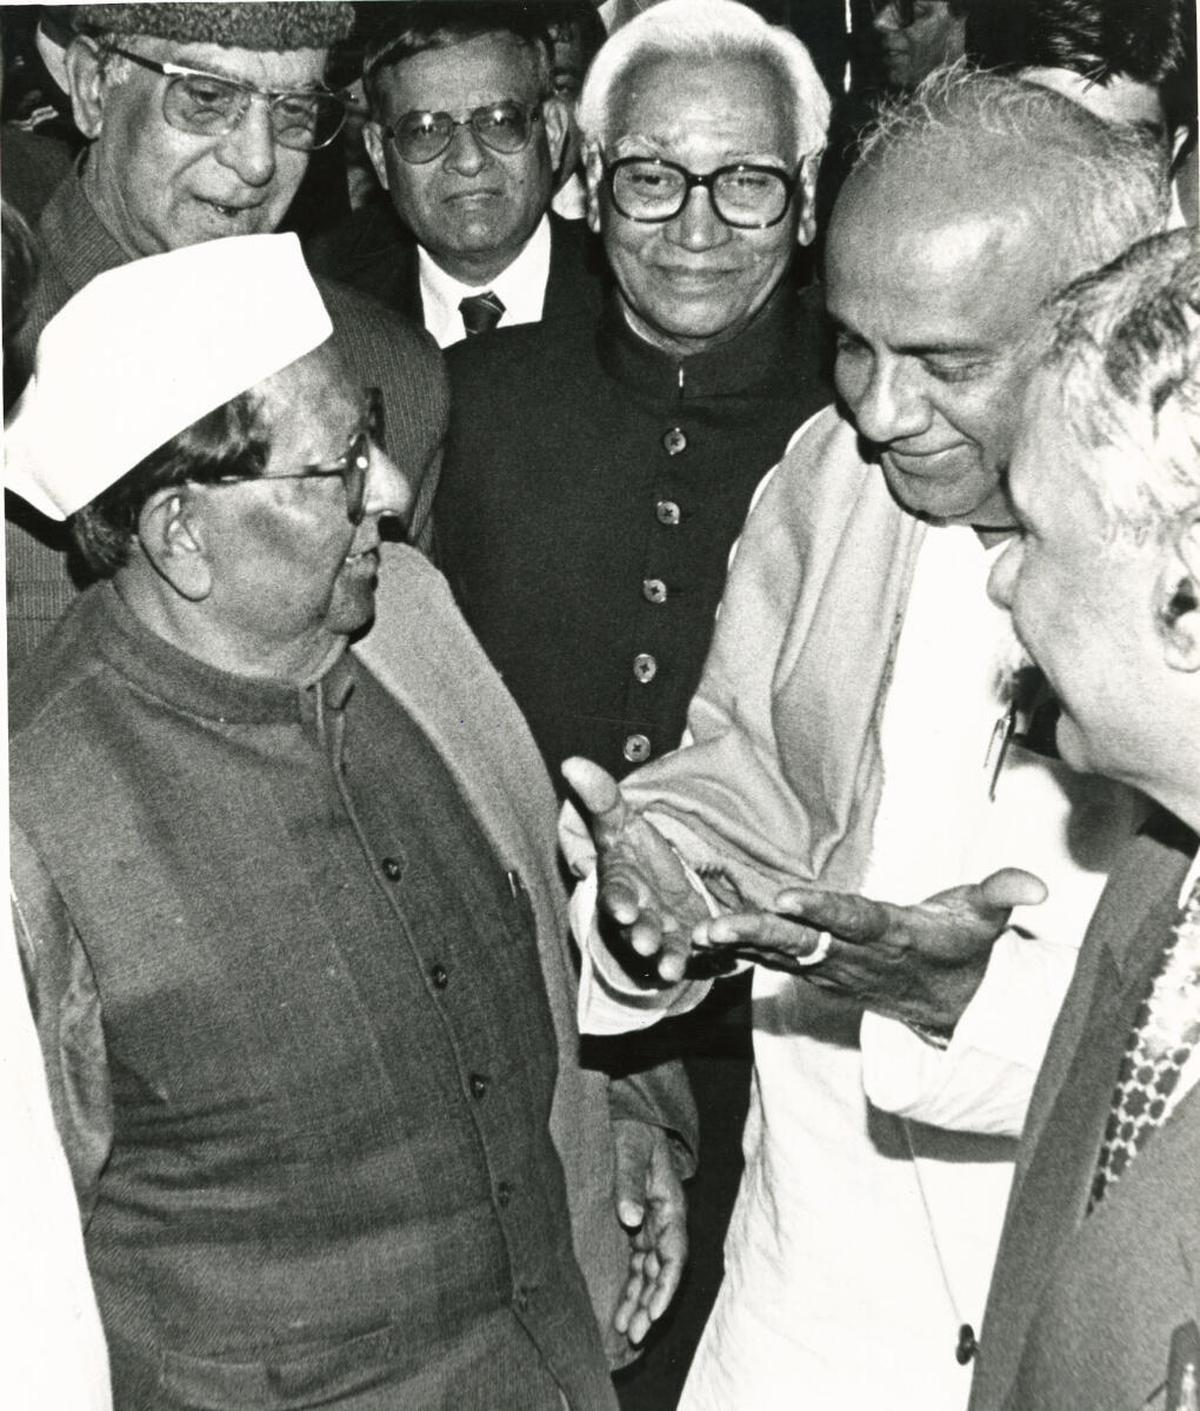 The Prime Minister, Mr. H. D. Deve Gowda, and the Congress president, Mr. Sitaram Kesri, at an Iftar party hosted by the President, Dr. Shankar Dayal Sharma, at Rashtrapati Bhavan in New Delhi on February 07, 1997